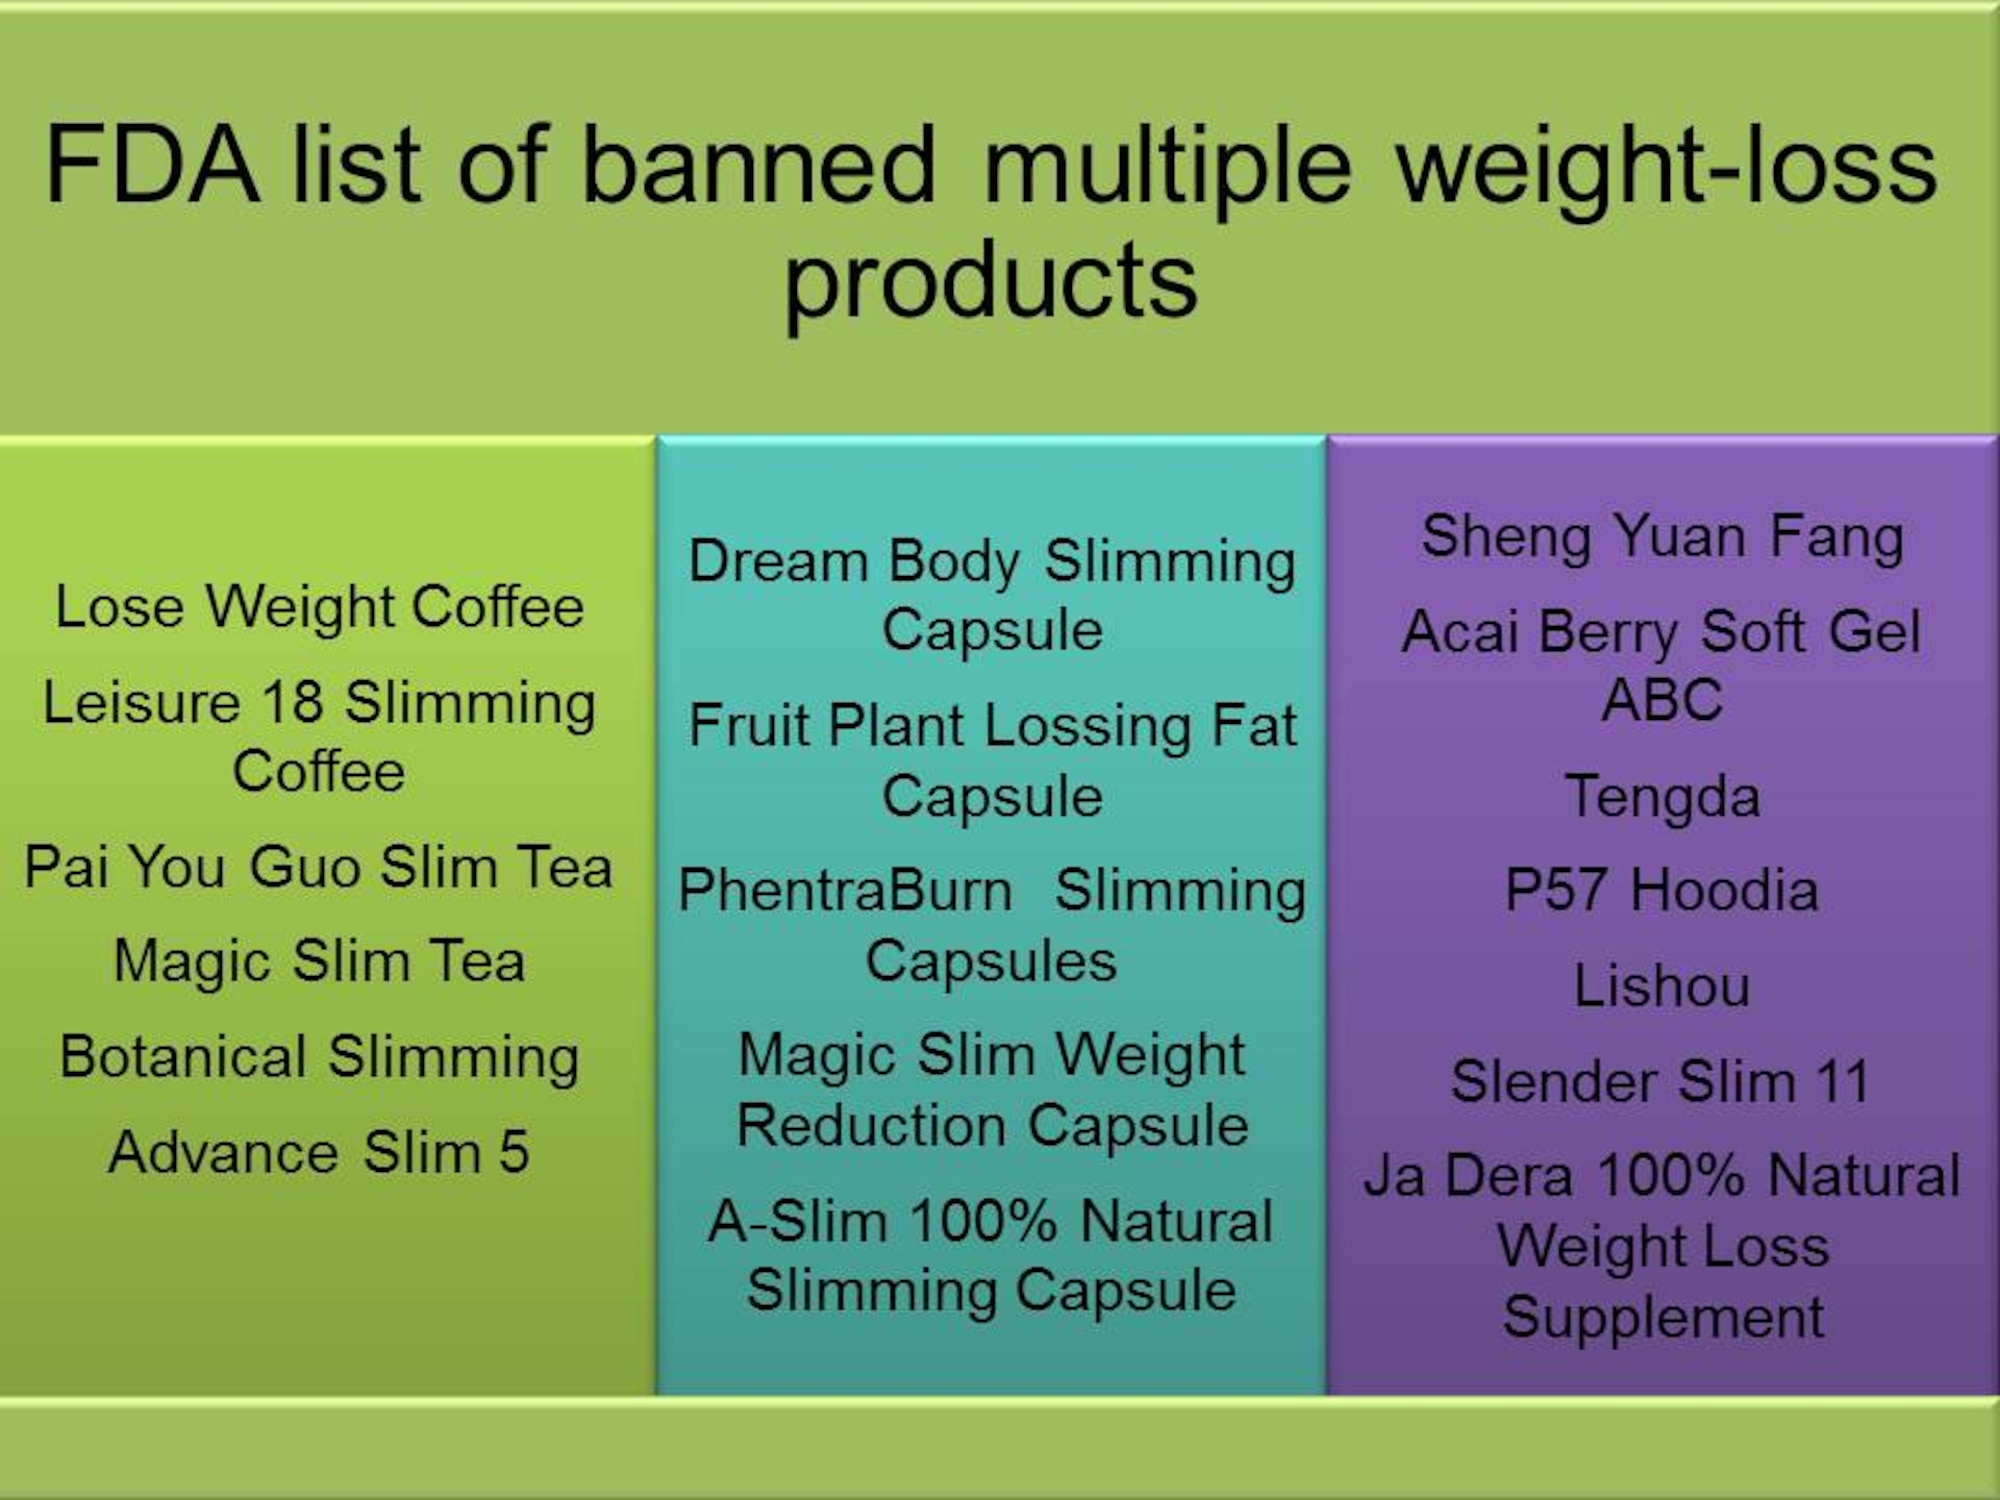 The Food and Drug Administration has a list of 18 “tainted” multiple weight-loss supplements that contain sibutramine – which was removed from the market in October 2010 for safety reasons. Sibutramine is known to substantially increase blood pressure and/or pulse rate. The FDA has found nearly 300 fraudulent products promoted mainly for weight loss, sexual enhancement and bodybuilding, often represented as being “all natural”. According to the FDA website, they have received numerous reports of harm associated with the use of these products, including stroke, liver injury, kidney failure, heart palpitations and death. (U.S. Air Force graphic by Airman 1st Class Kedesha Pennant/Released)